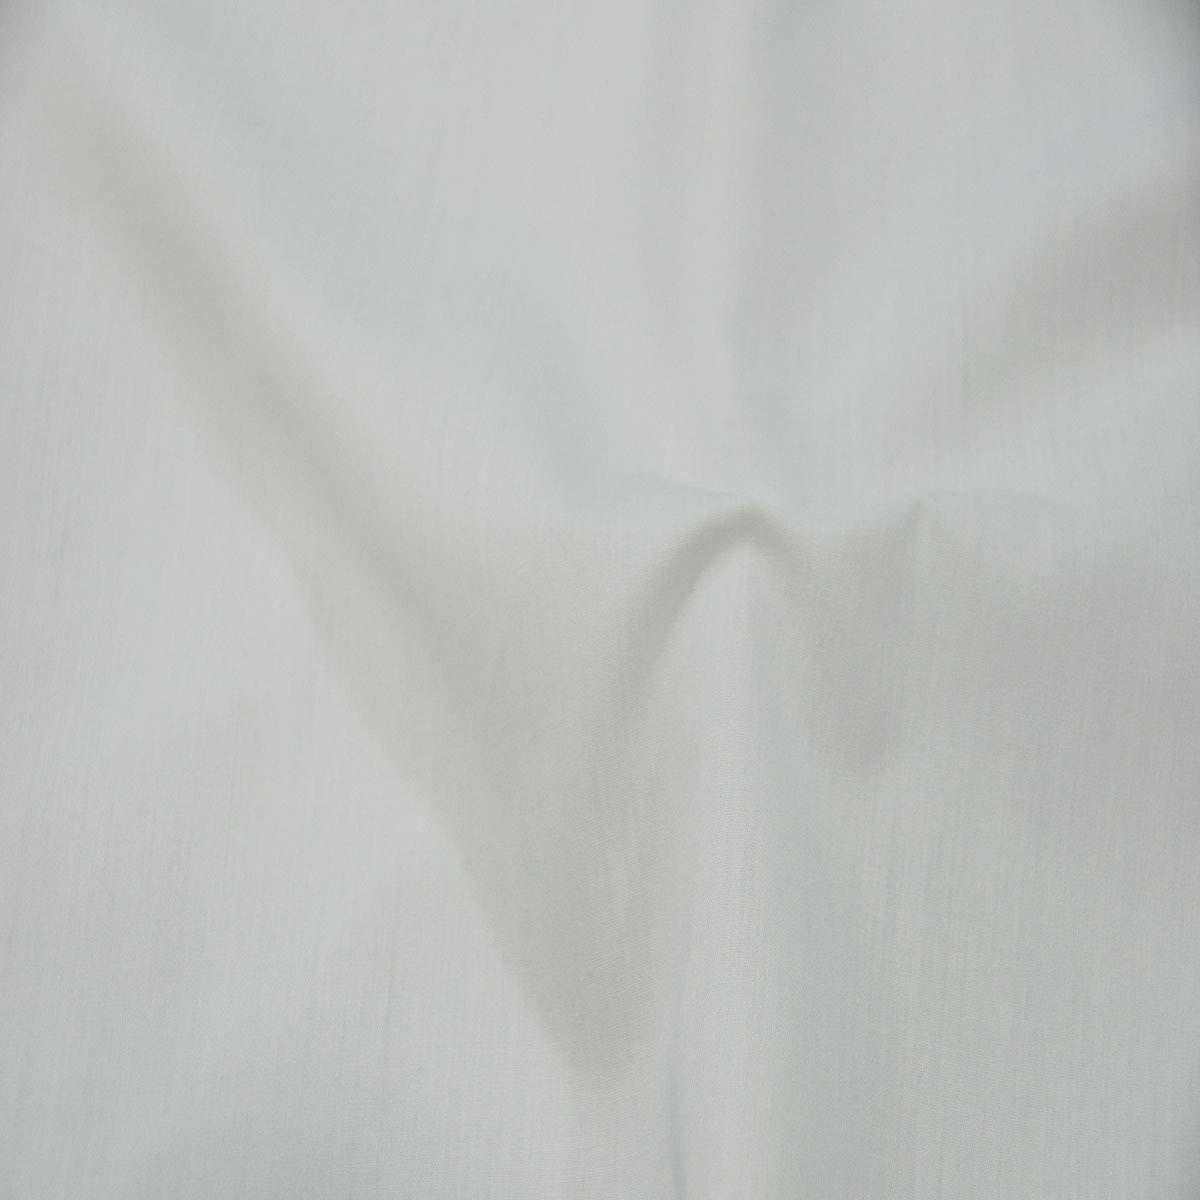 60 Wide Premium Cotton Blend Broadcloth Fabric By The Yard - White